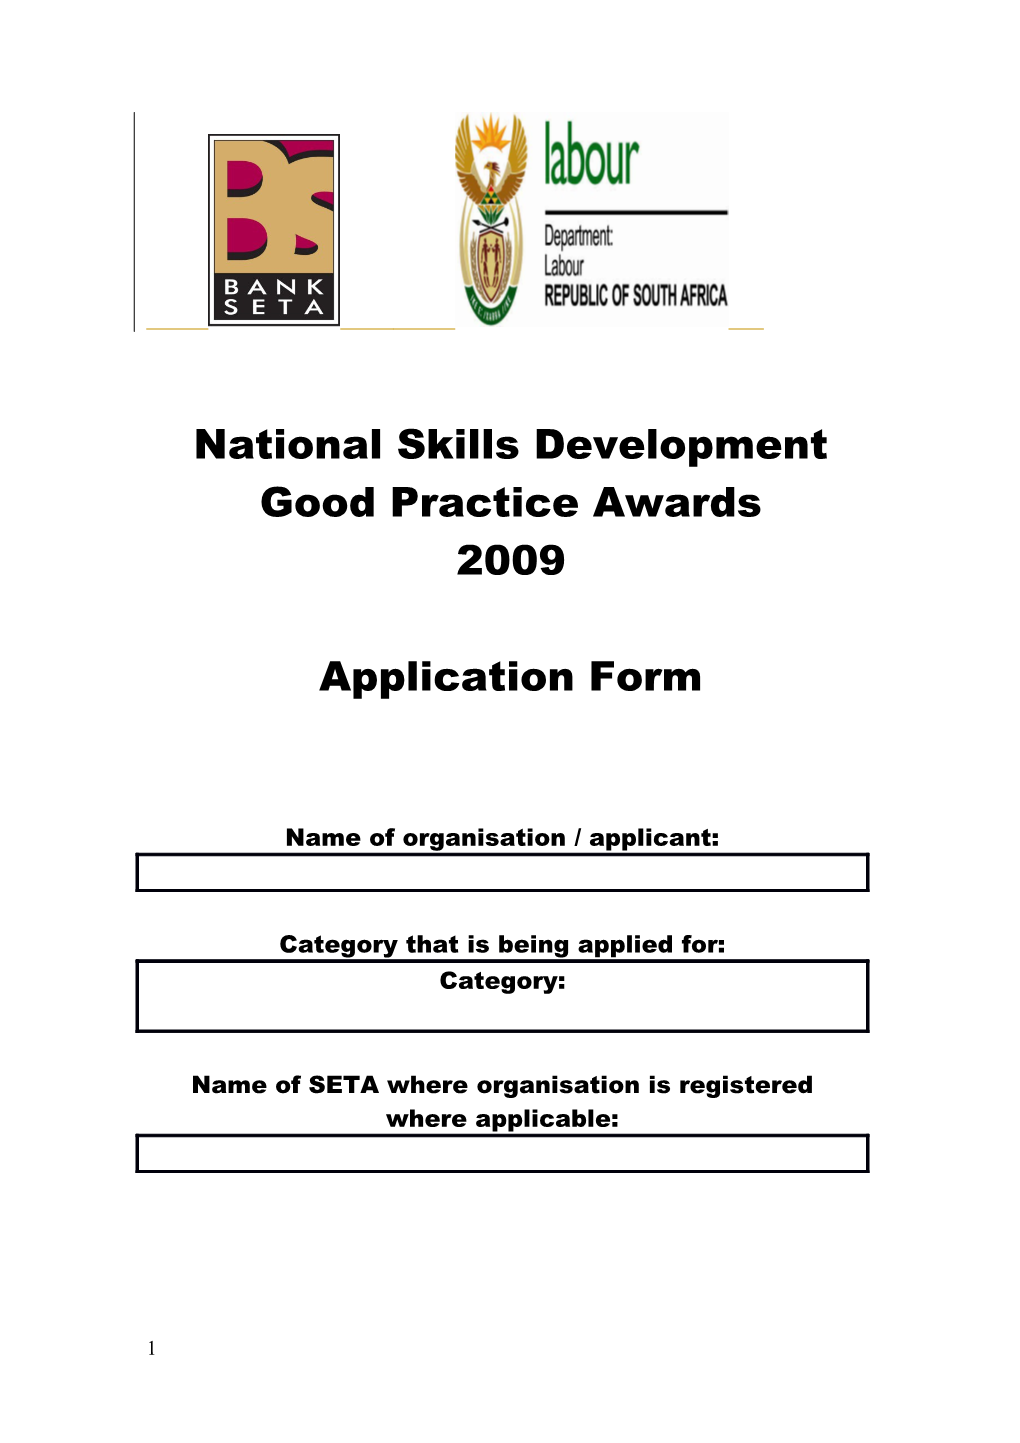 Description of Your Organisation S Skills Development Strategy/Approach